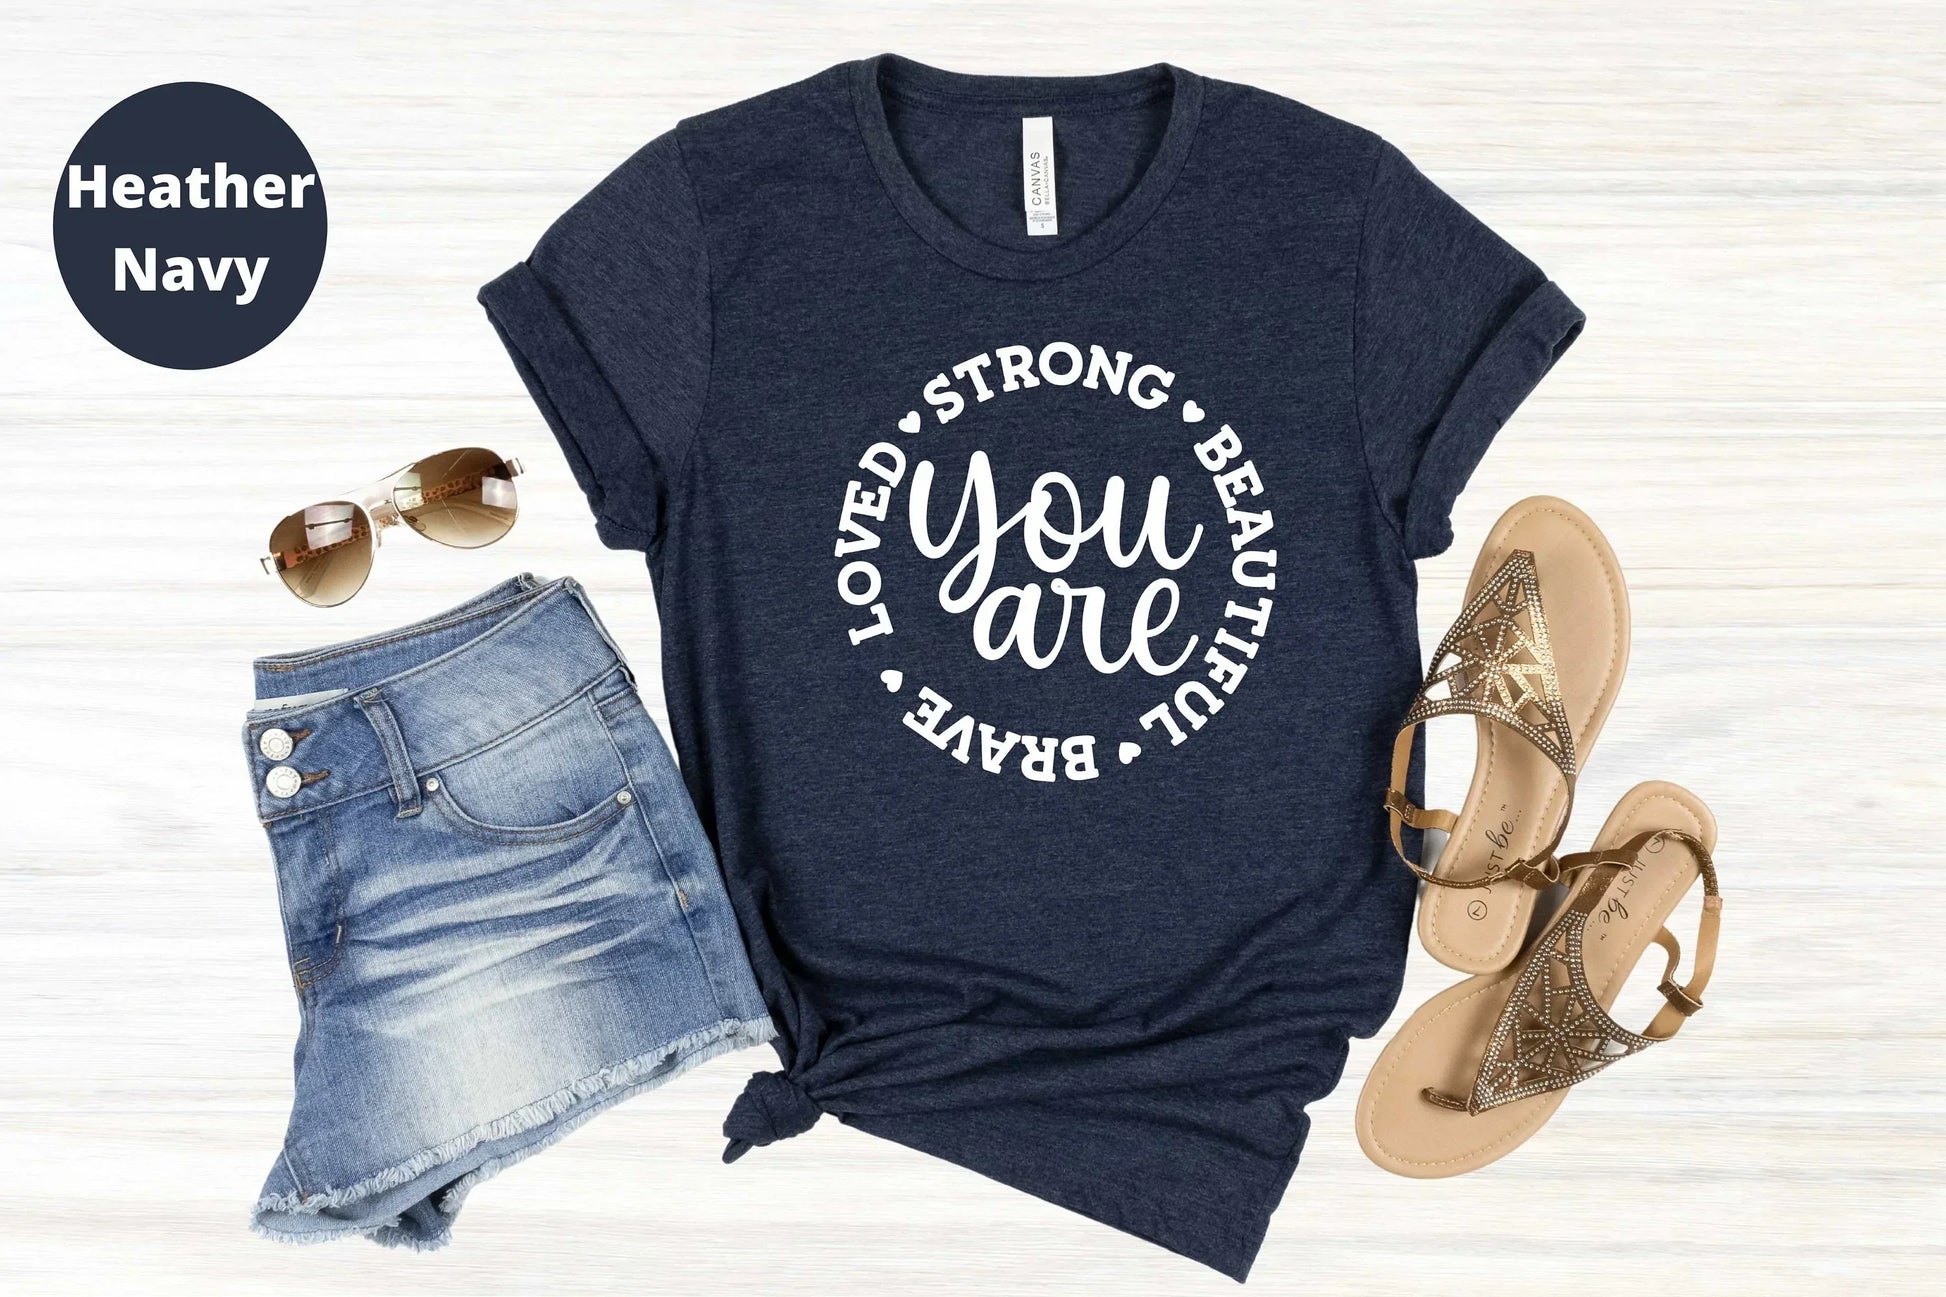 You are Loved Strong Beautiful Brave, Christian Self Love Shirt HMDesignStudioUS